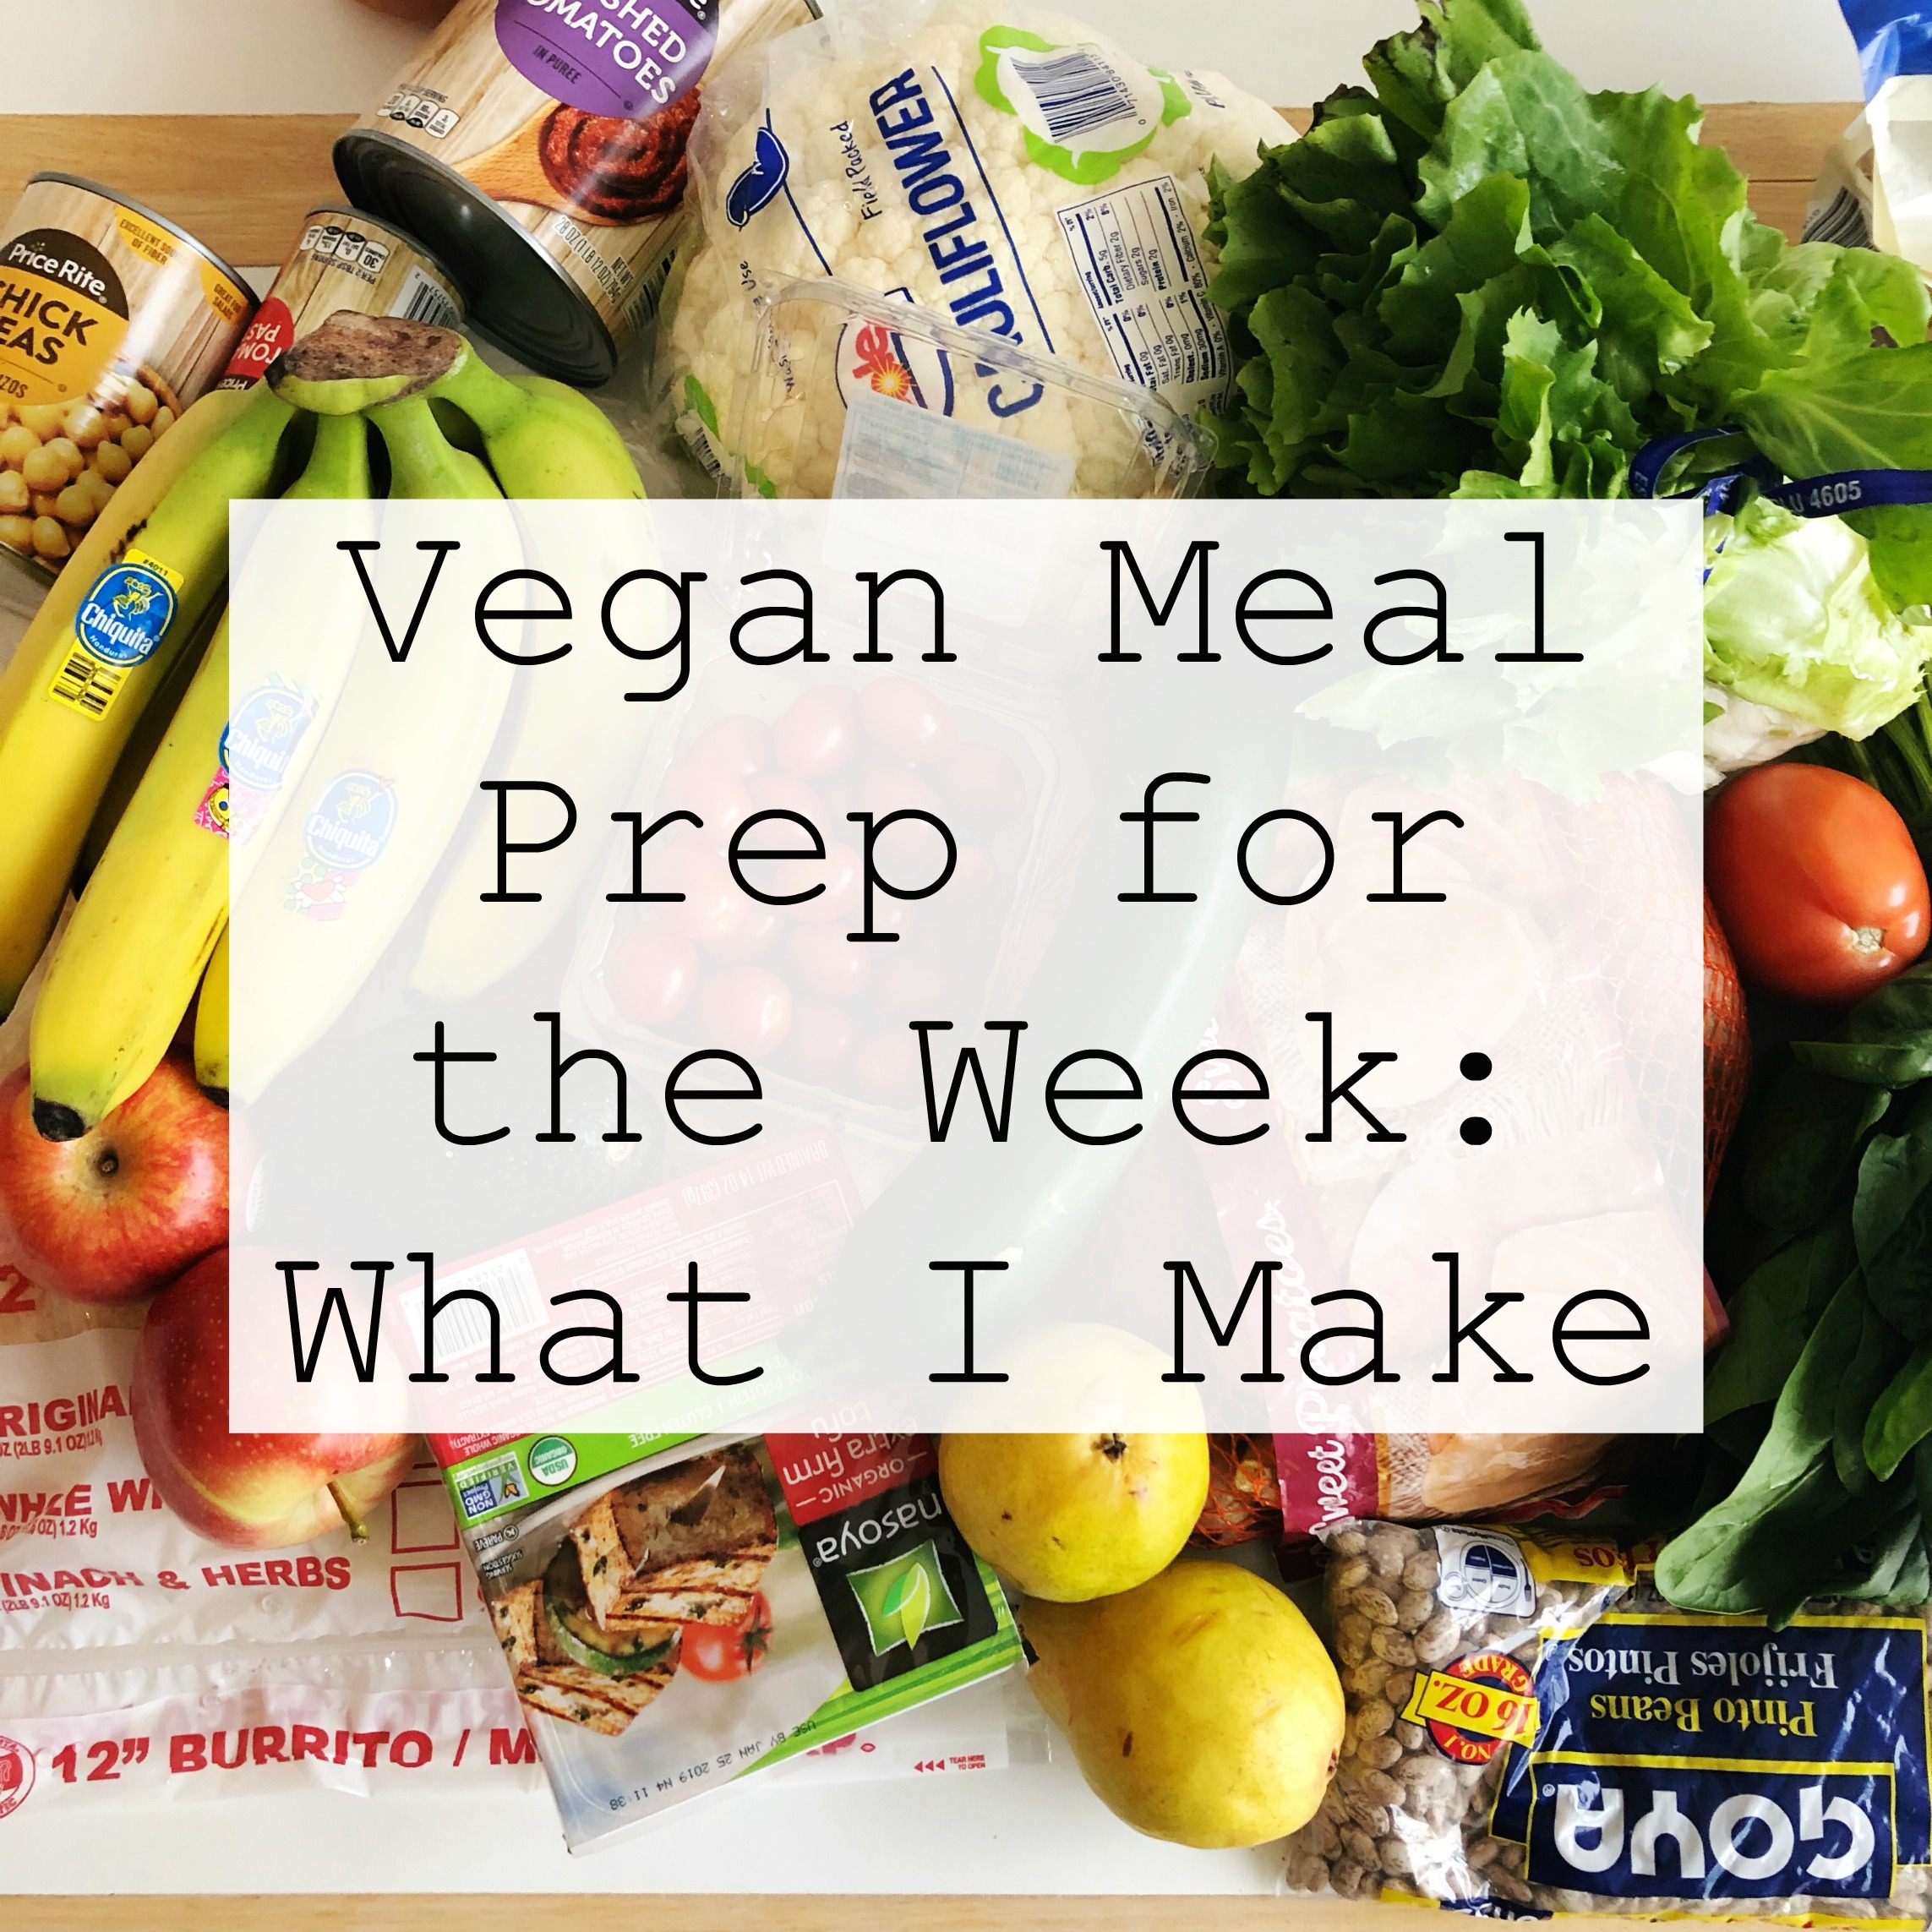 Vegan Meal Prep for the Week: What I Make